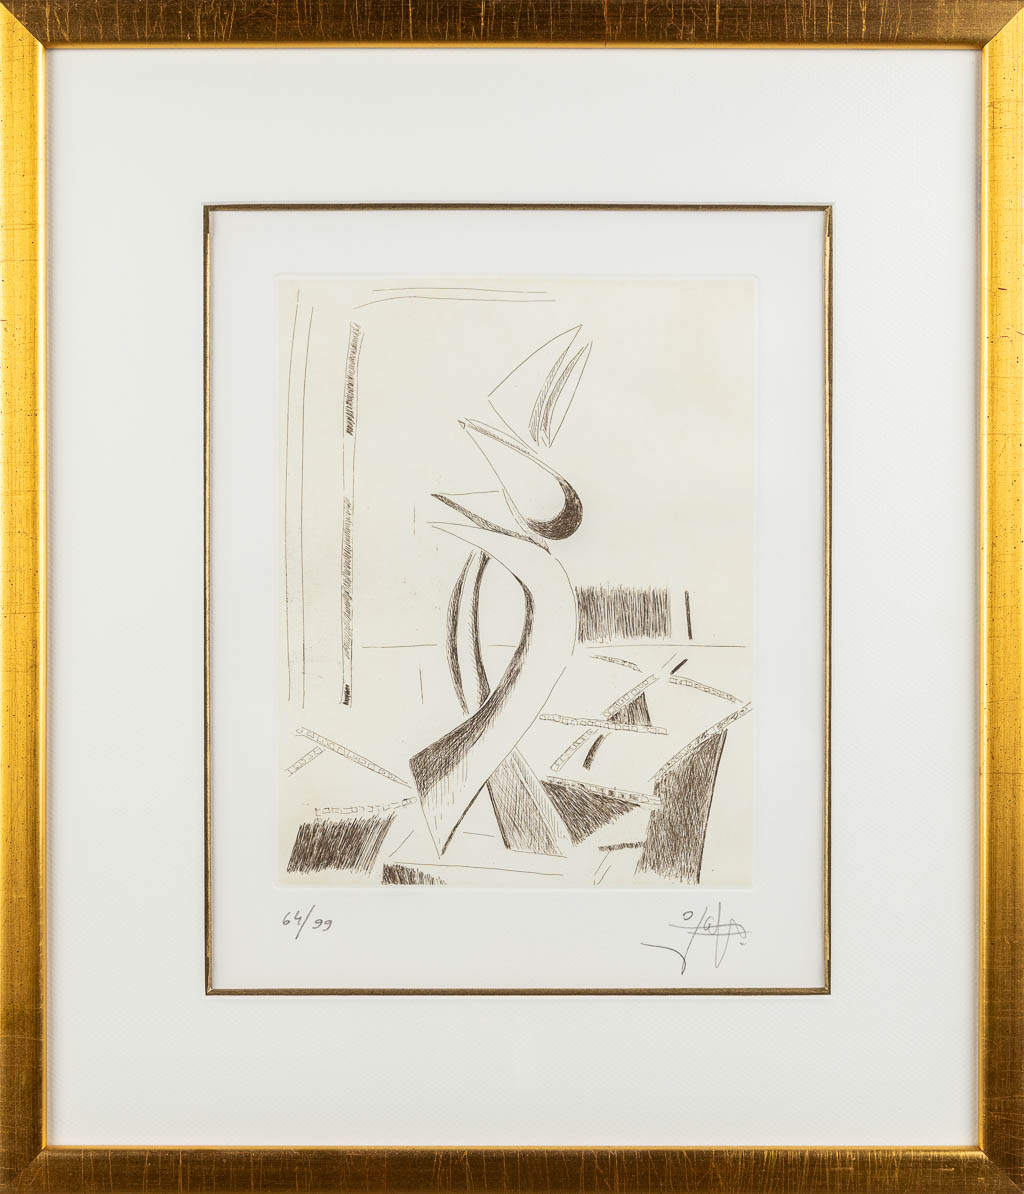 Pablo ATCHUGARRY (1954) 'Designs for a sculpture' Two lithographs. (W:26 x H:33 cm) - Image 3 of 15